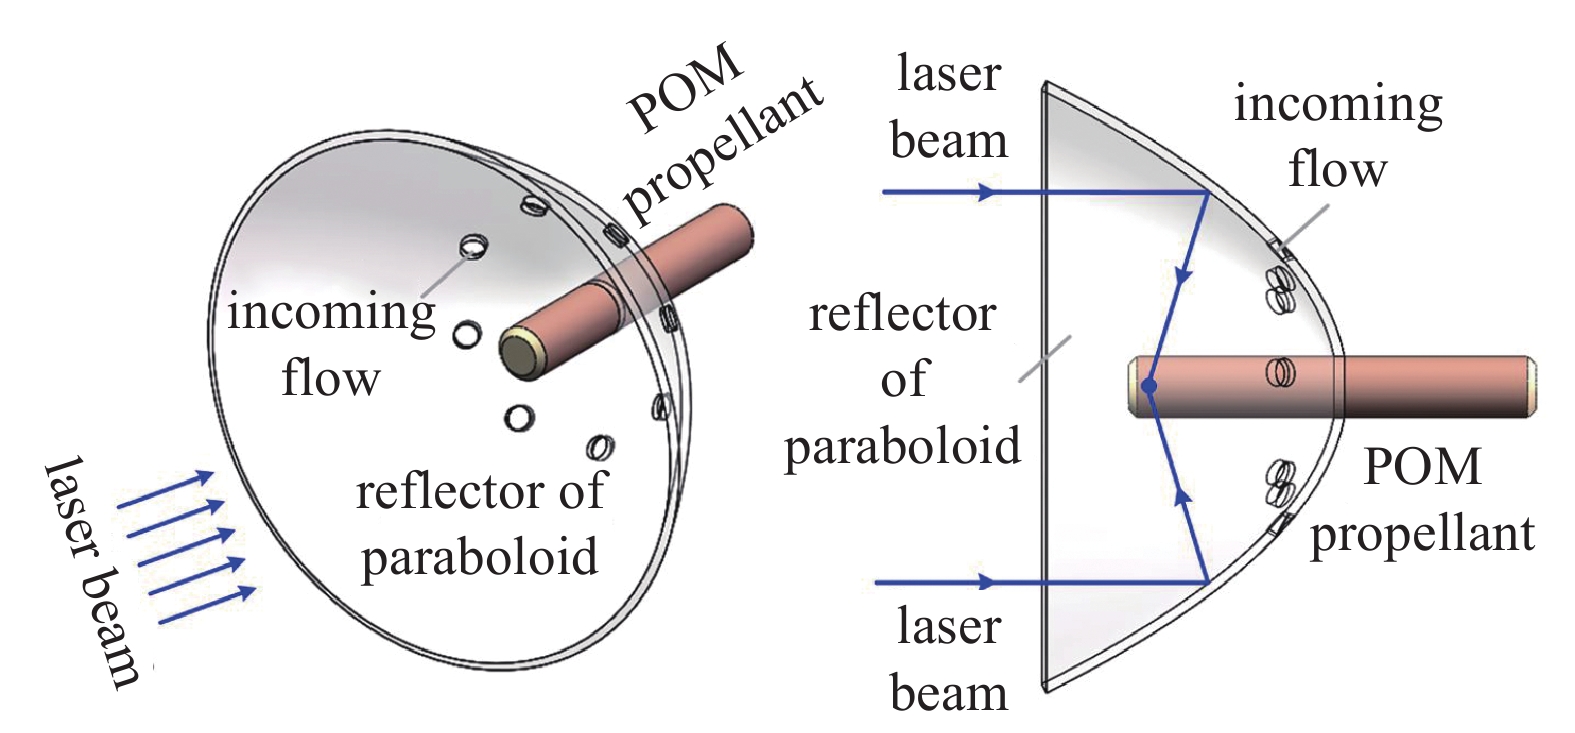 Schematic diagram of the parabolic reflector